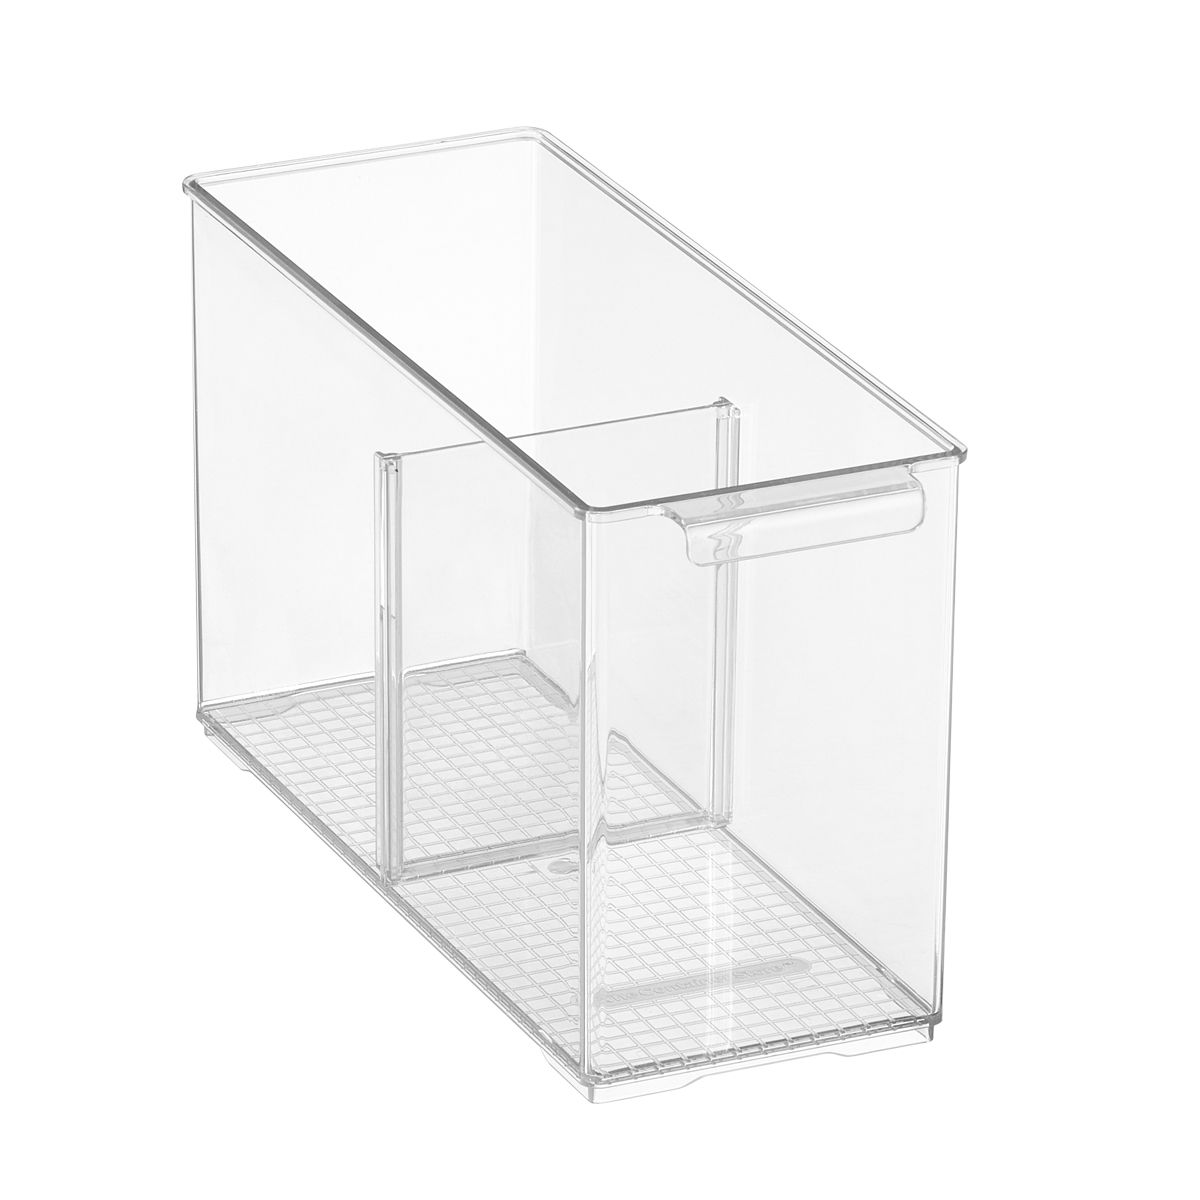 The Everything Organizer Small Cabinet Depth Pantry Bin w/ Divider | The Container Store